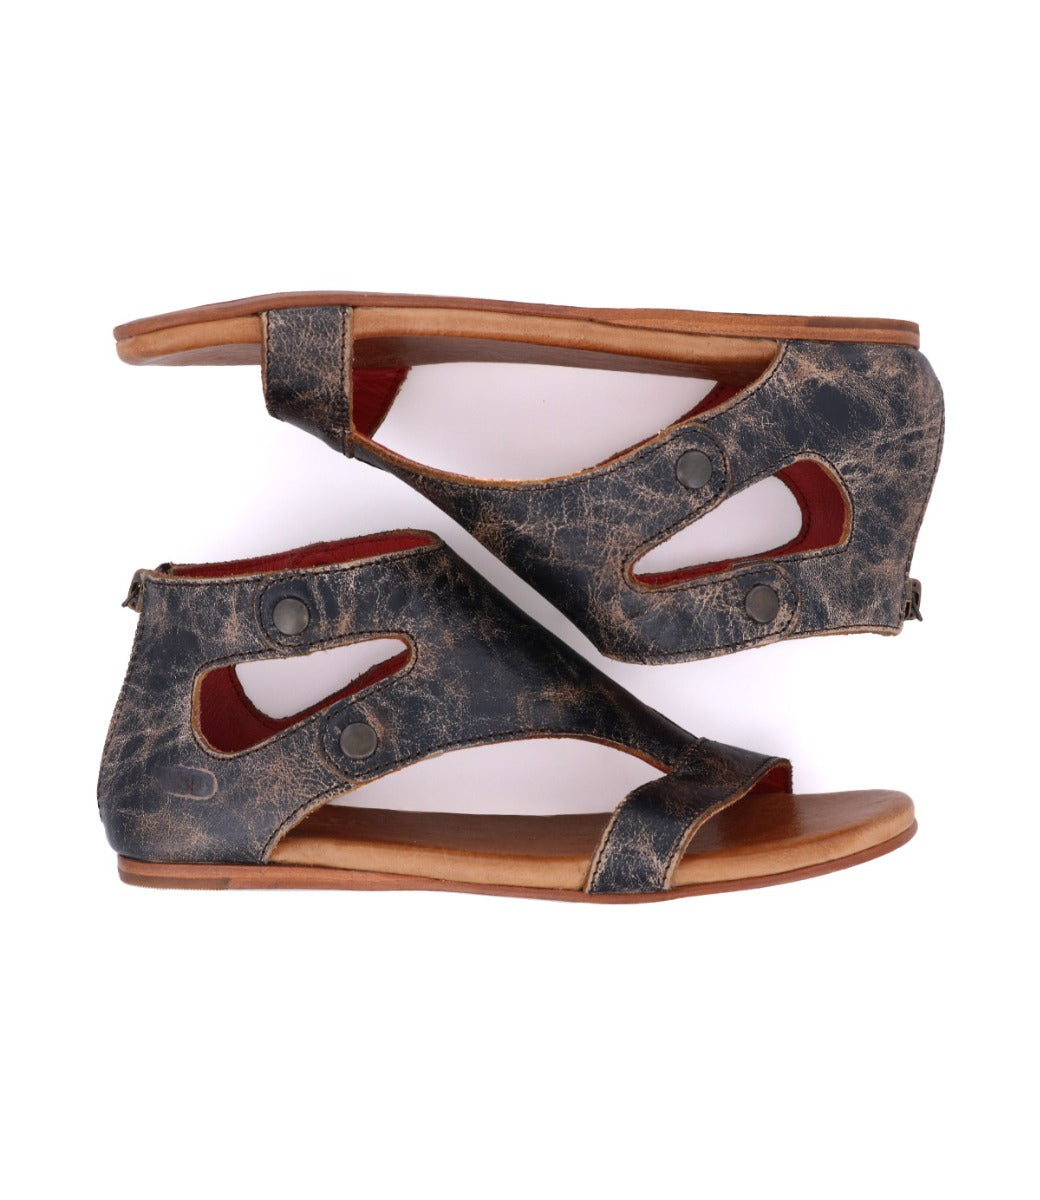 A pair of women's Soto pure leather sandals made by Bed Stu.